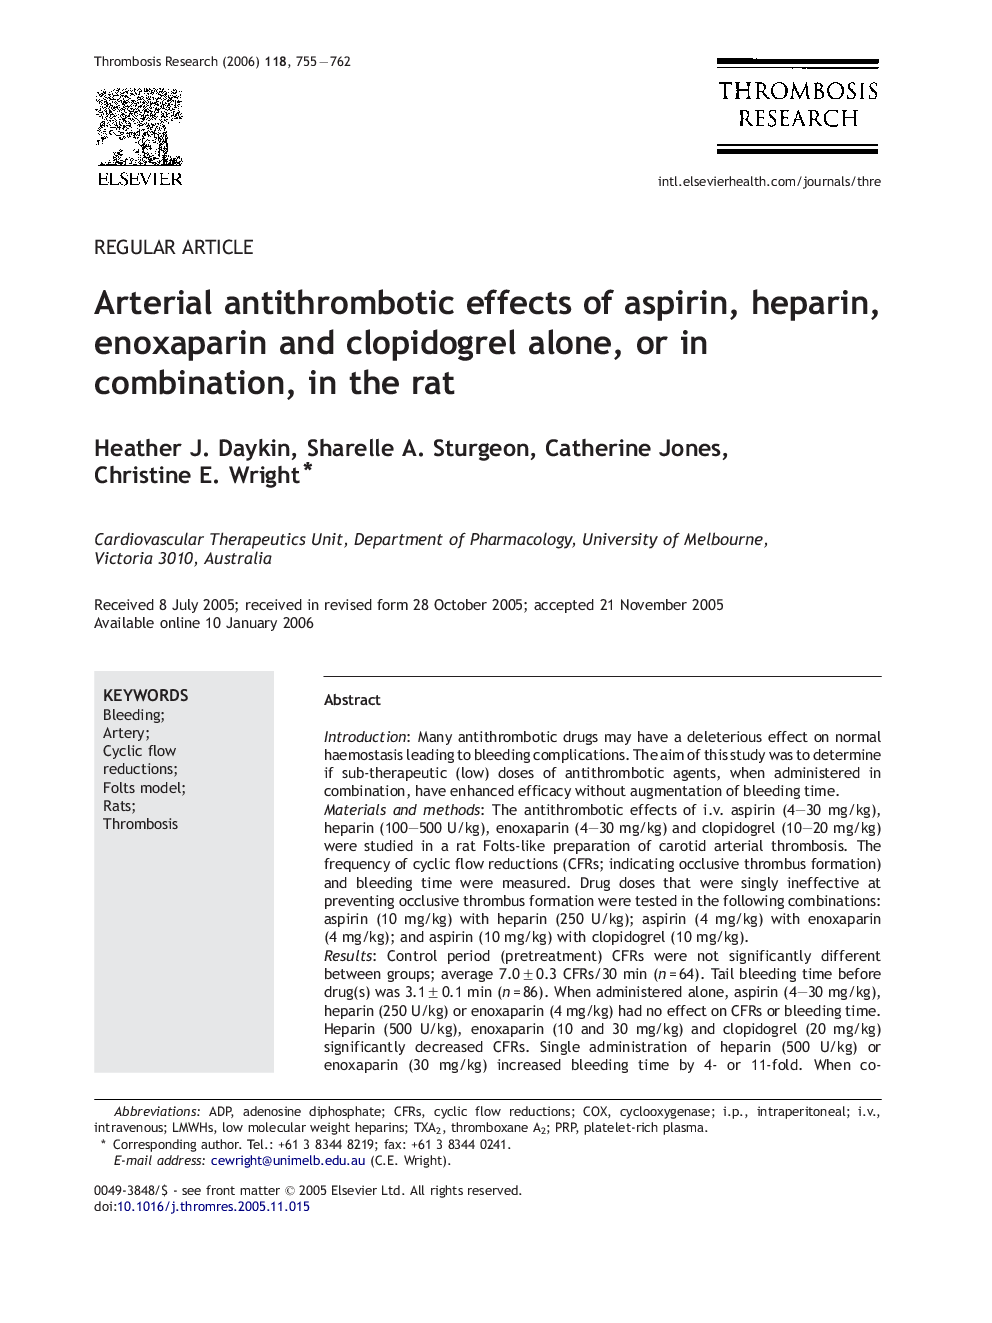 Arterial antithrombotic effects of aspirin, heparin, enoxaparin and clopidogrel alone, or in combination, in the rat